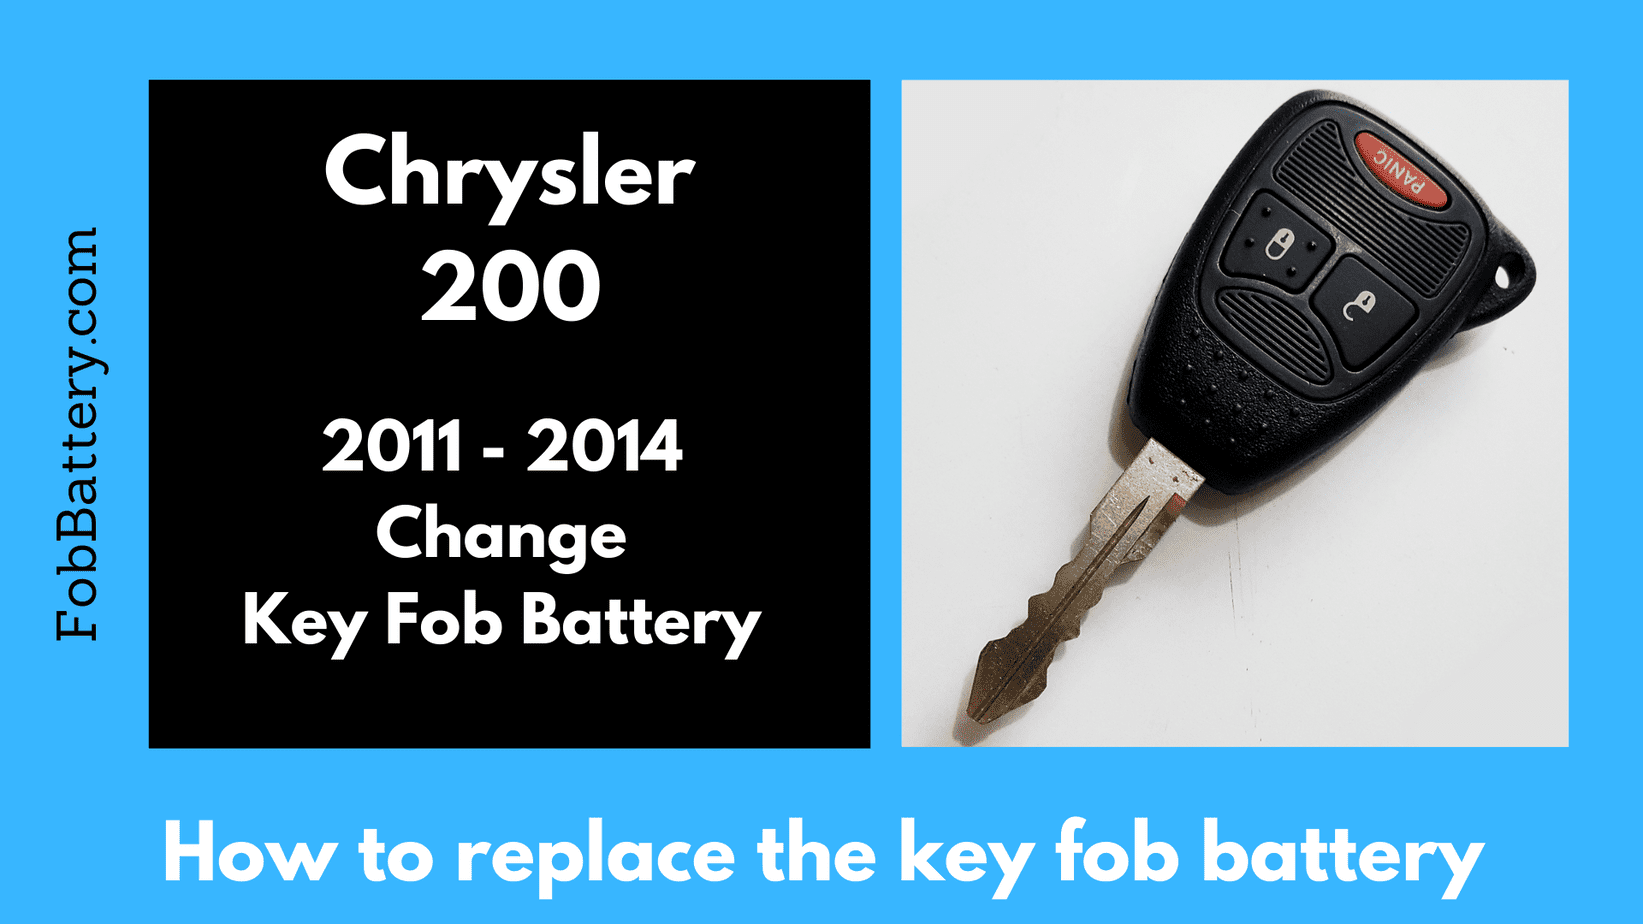 Chrysler 200 key fob battery replacement.